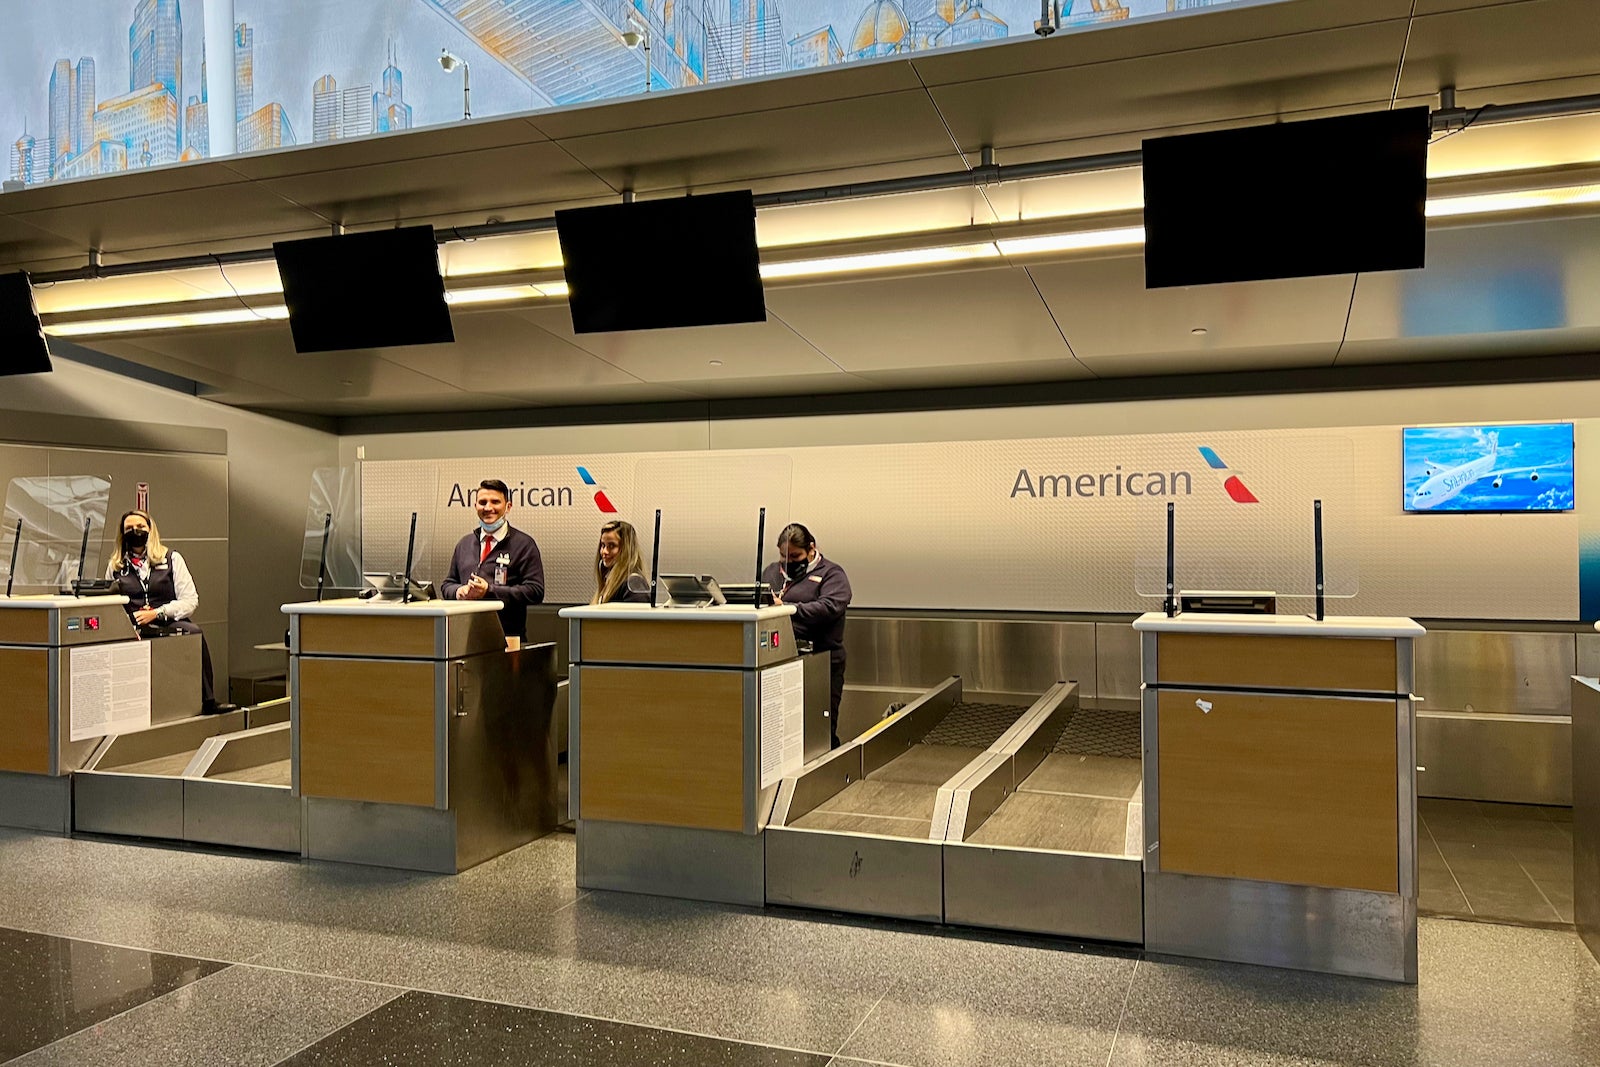 American Airlines check-in counter